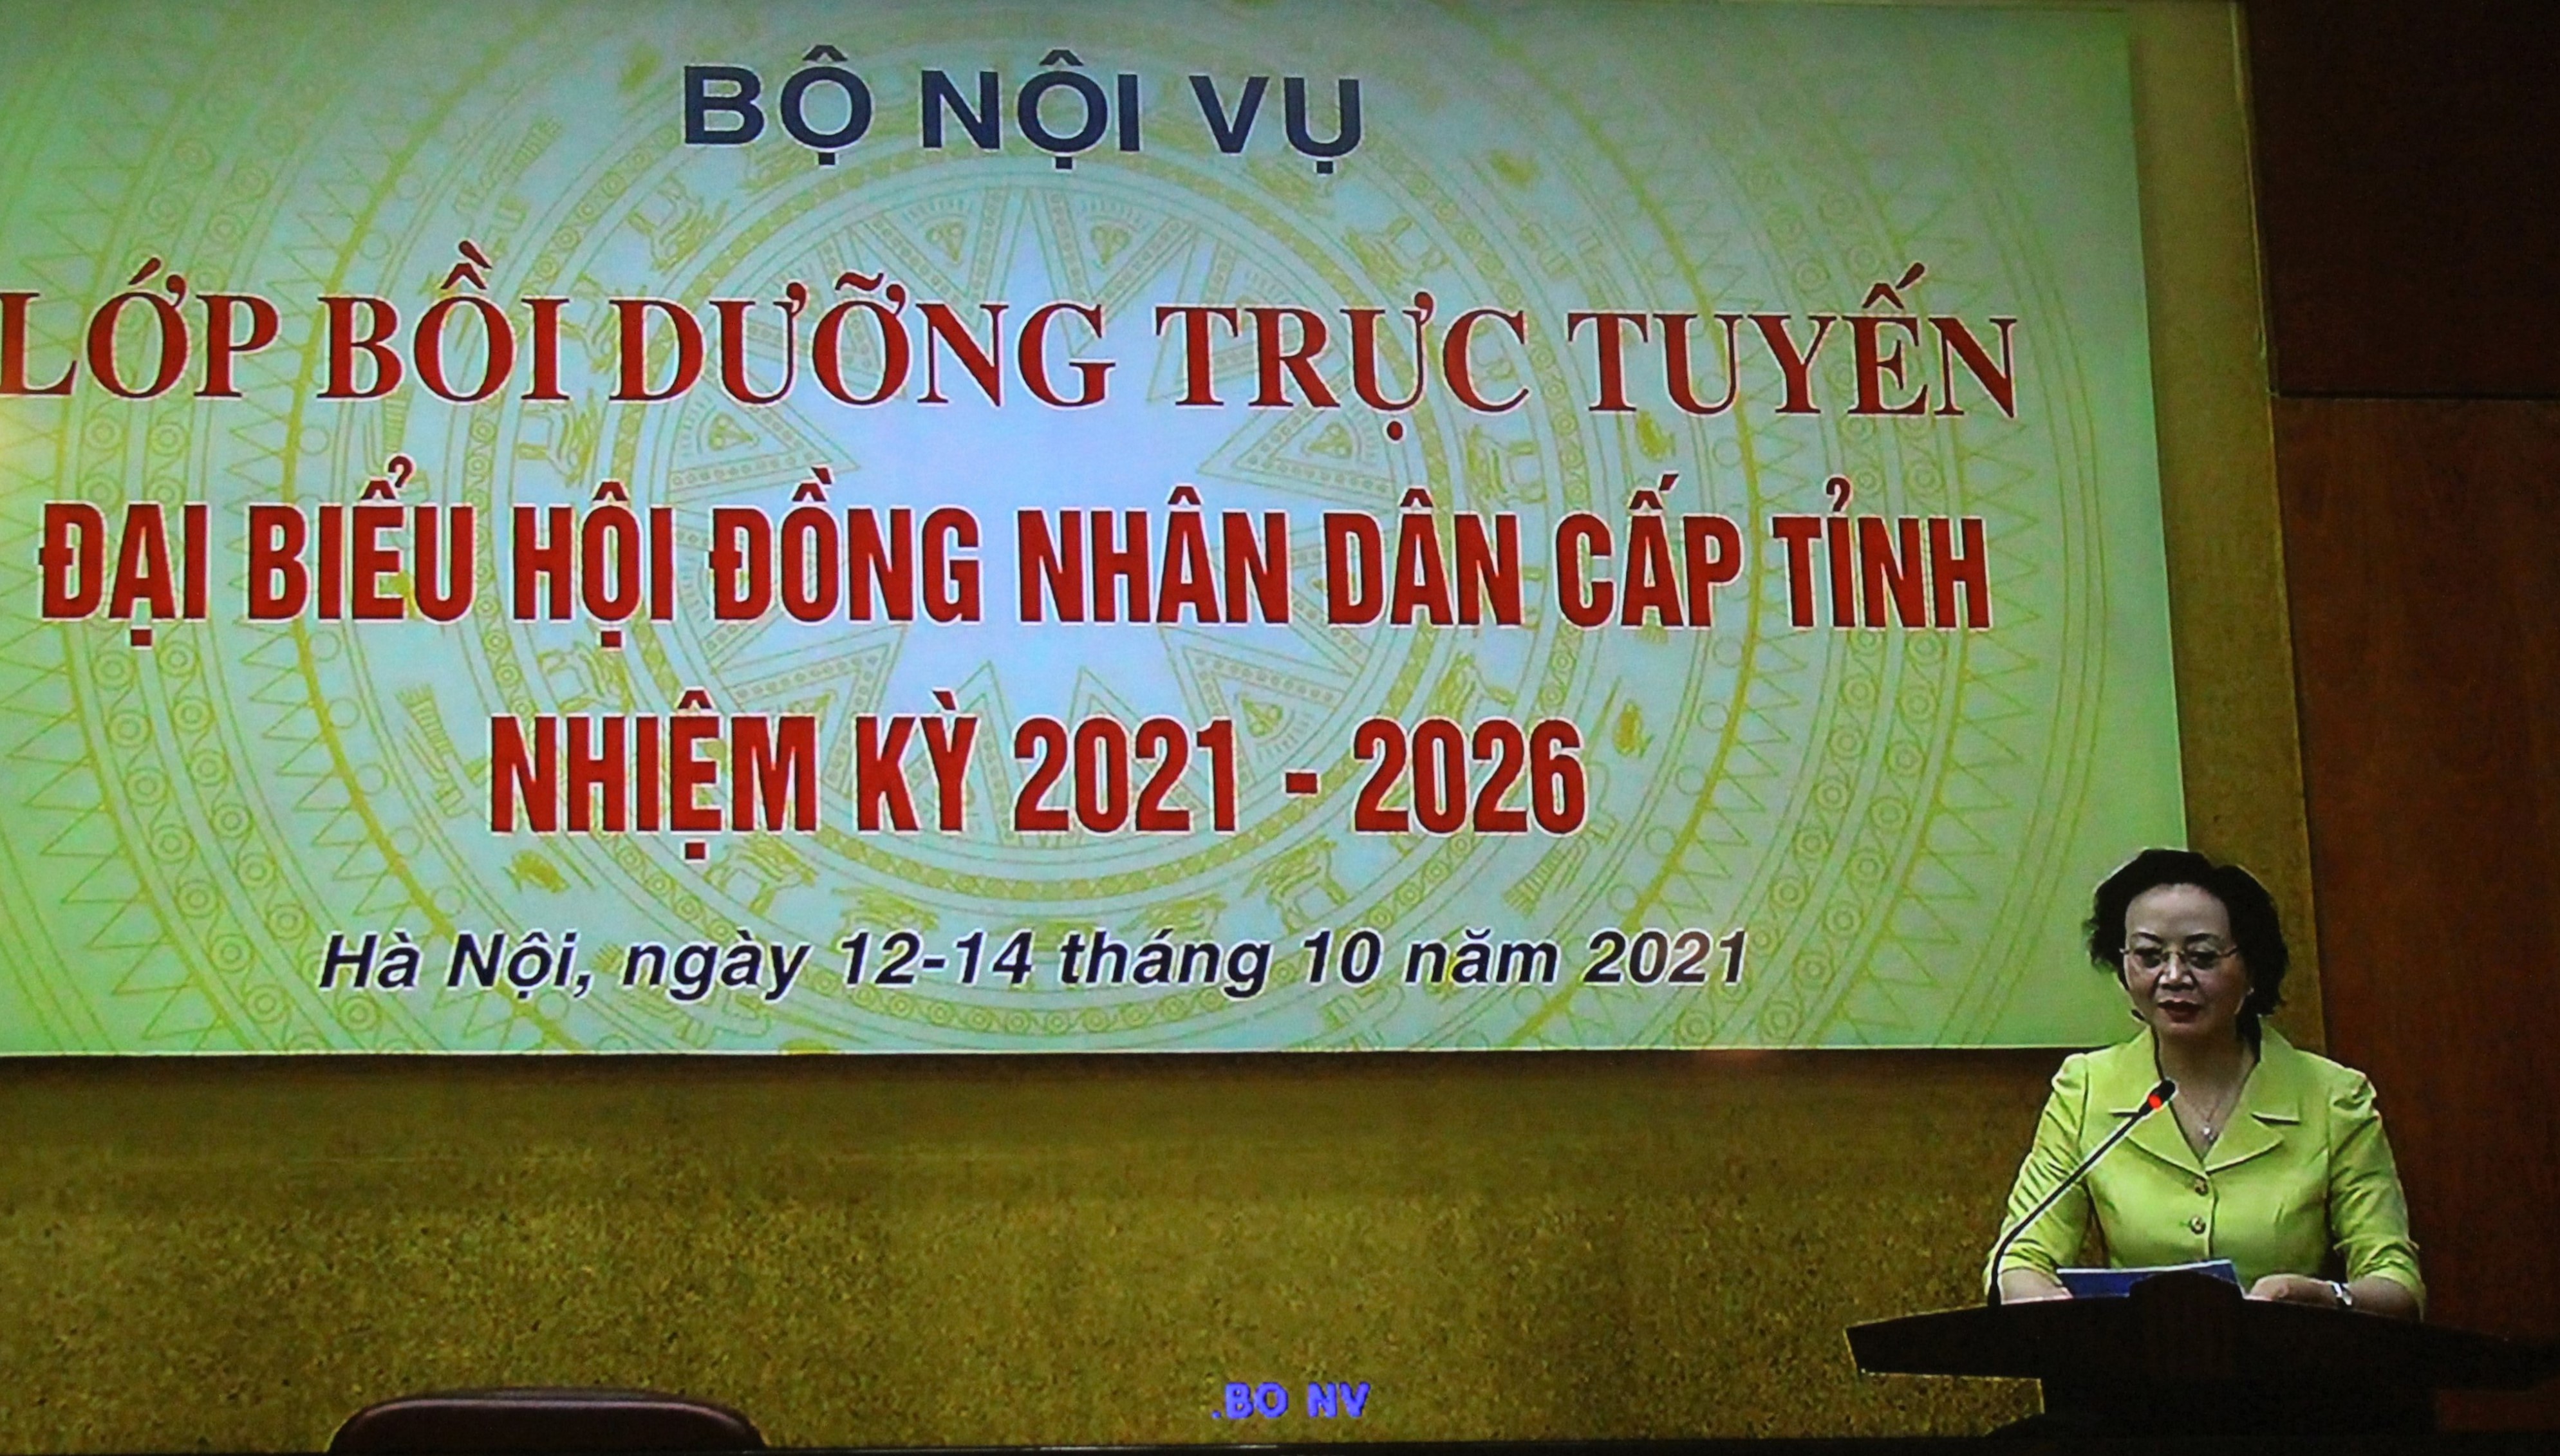 Online training for delegates of the Provincial People’s Council, the 2021 - 2026 term